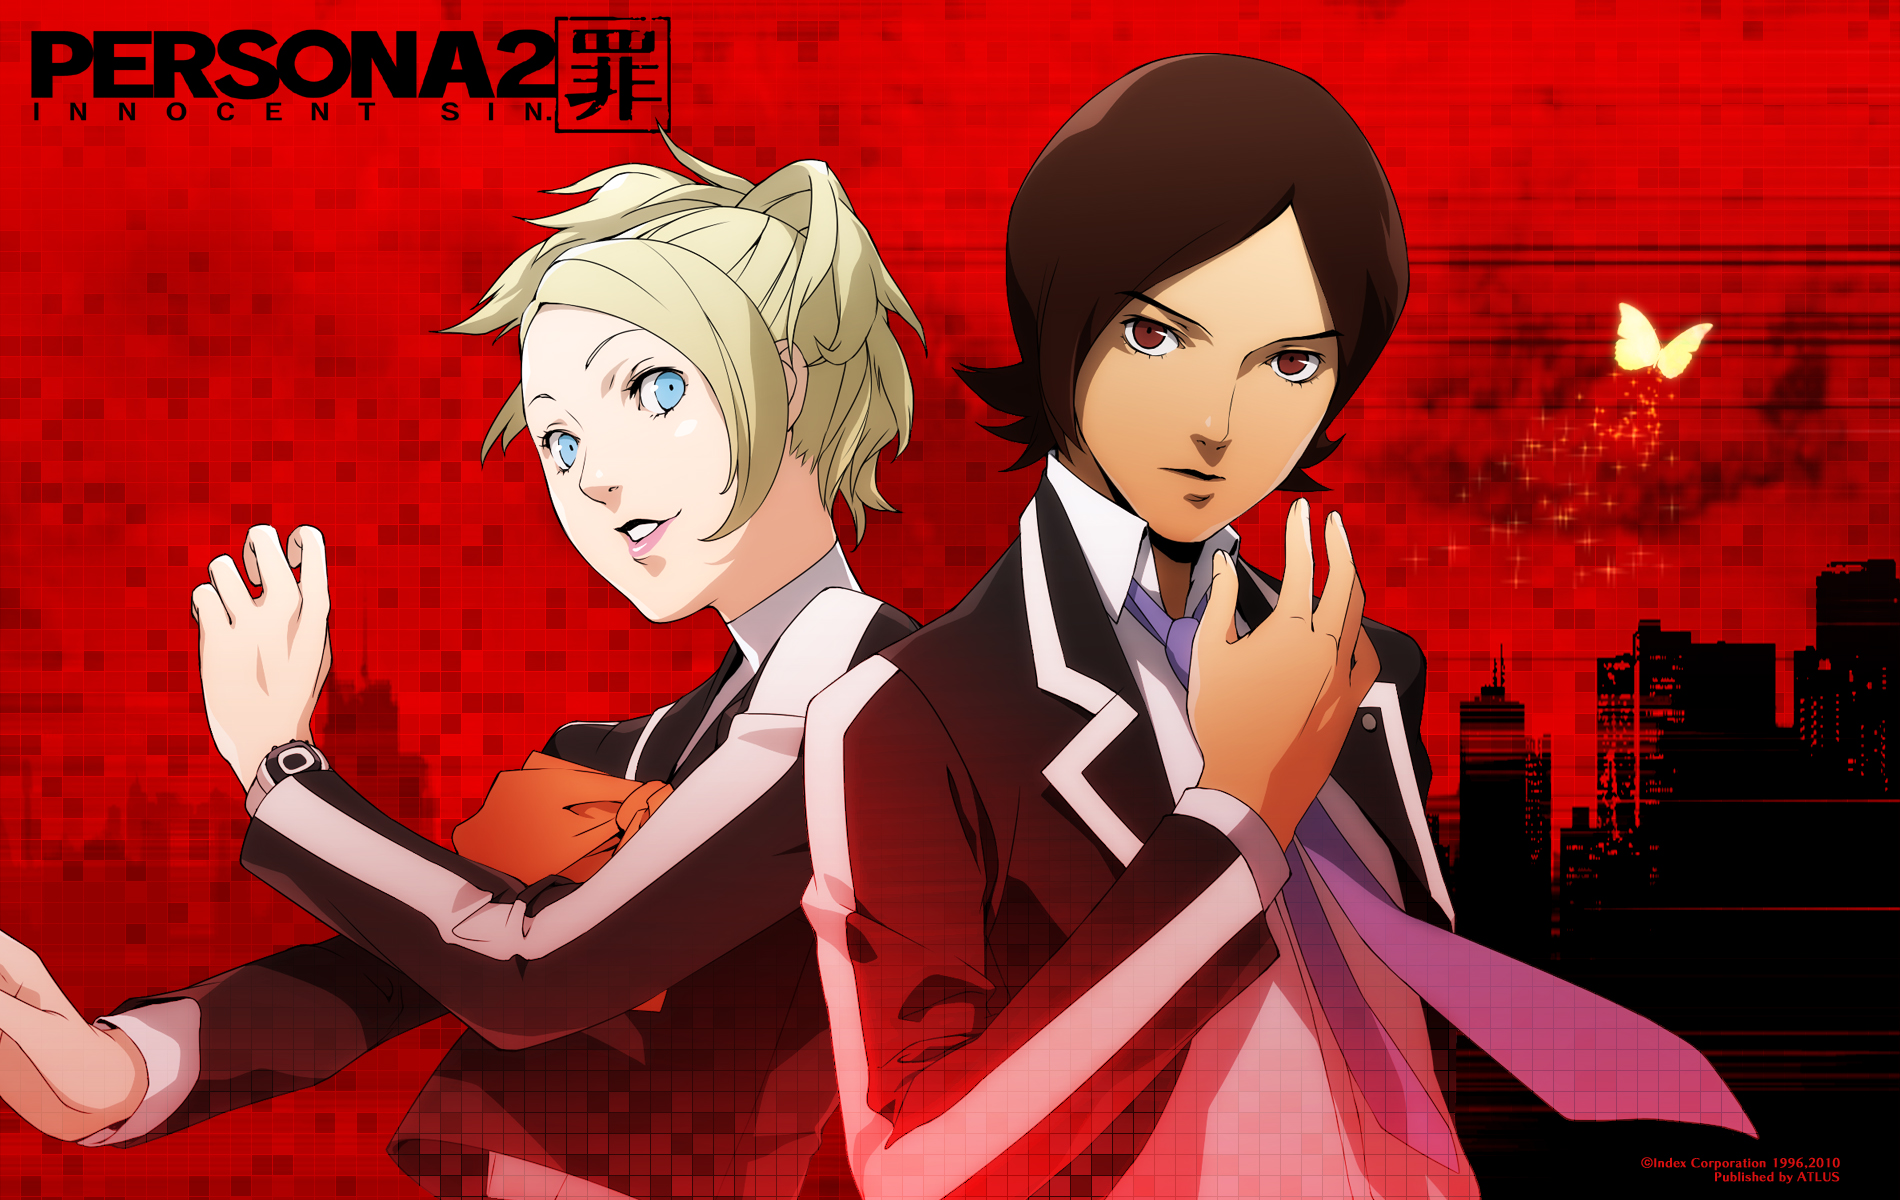 HQ Persona 2 Wallpapers | File 1346.52Kb